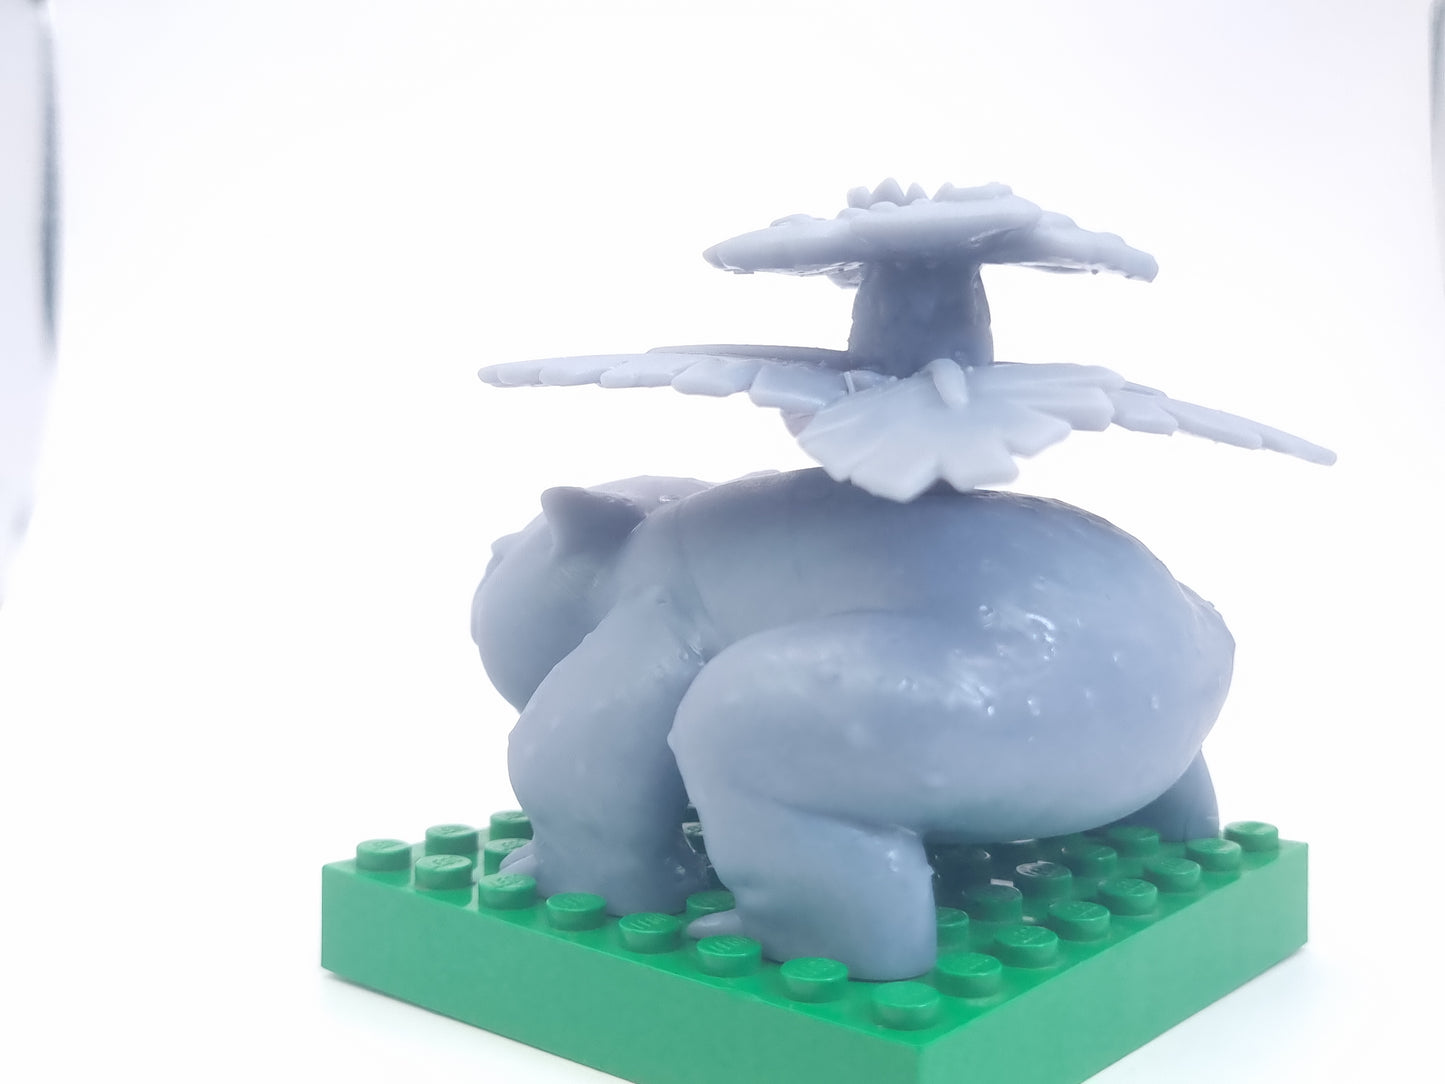 Lego compatible custom 3D printed creature with tree on his back!